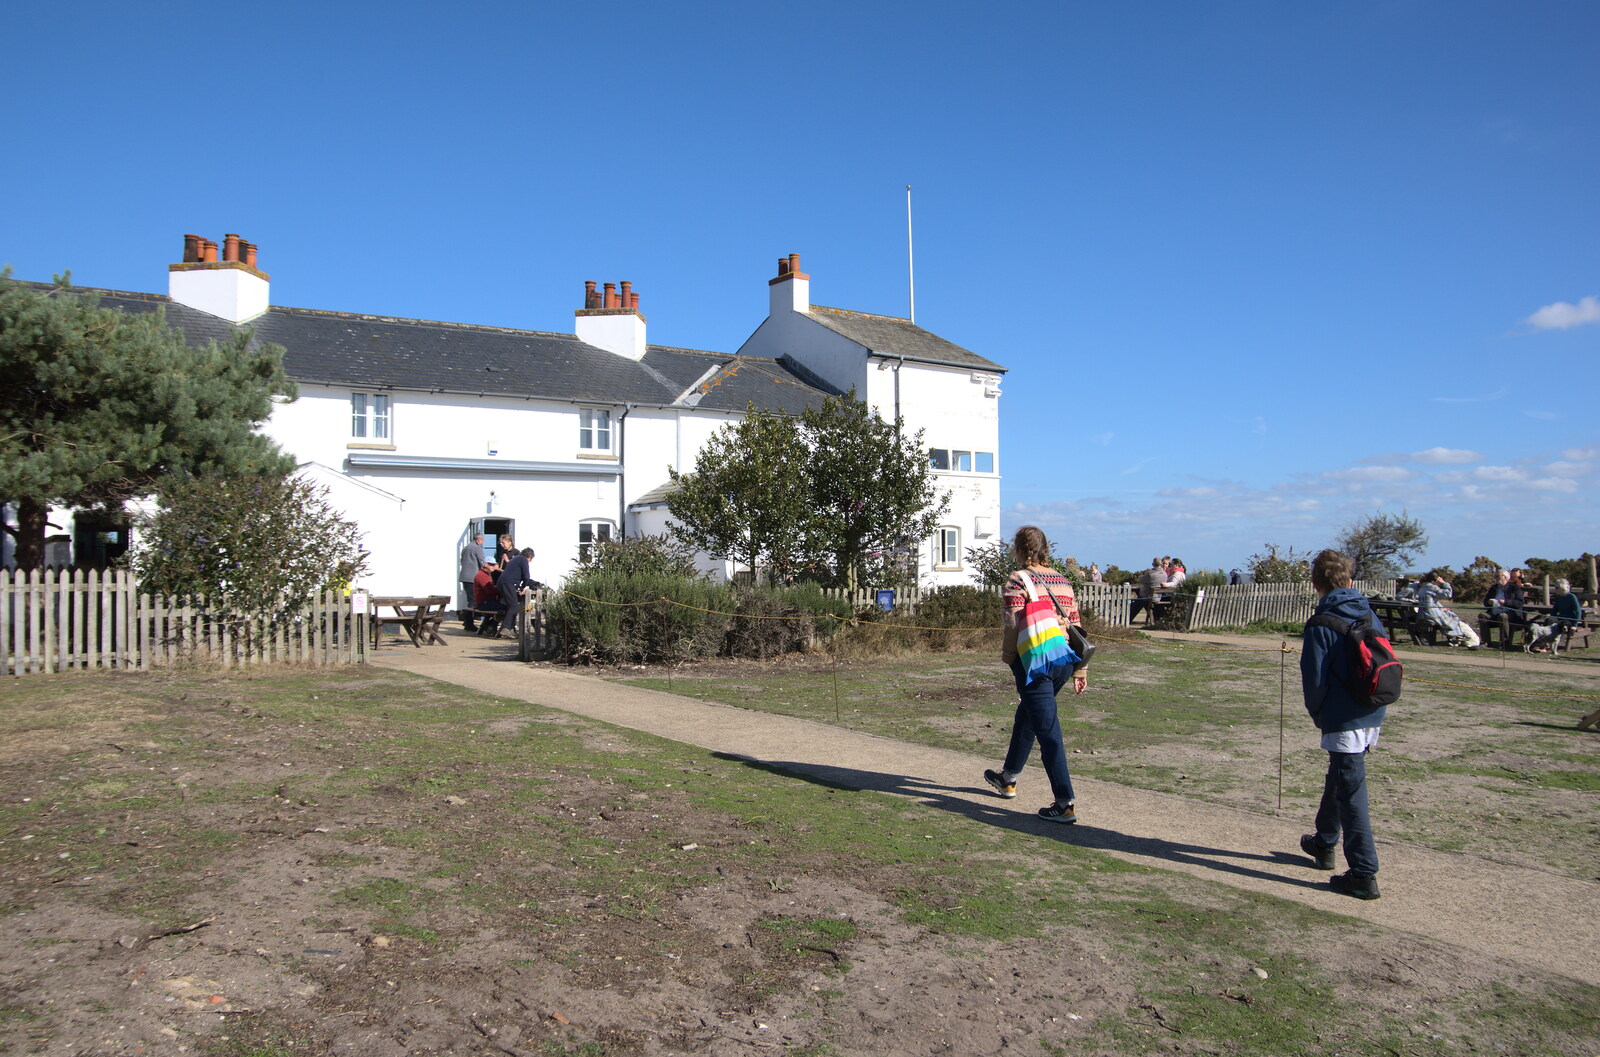 Harry's Scout Hike, Walberswick and Dunwich, Suffolk - 9th October 2022: We're at the Coastguard café at Dunwich Heath